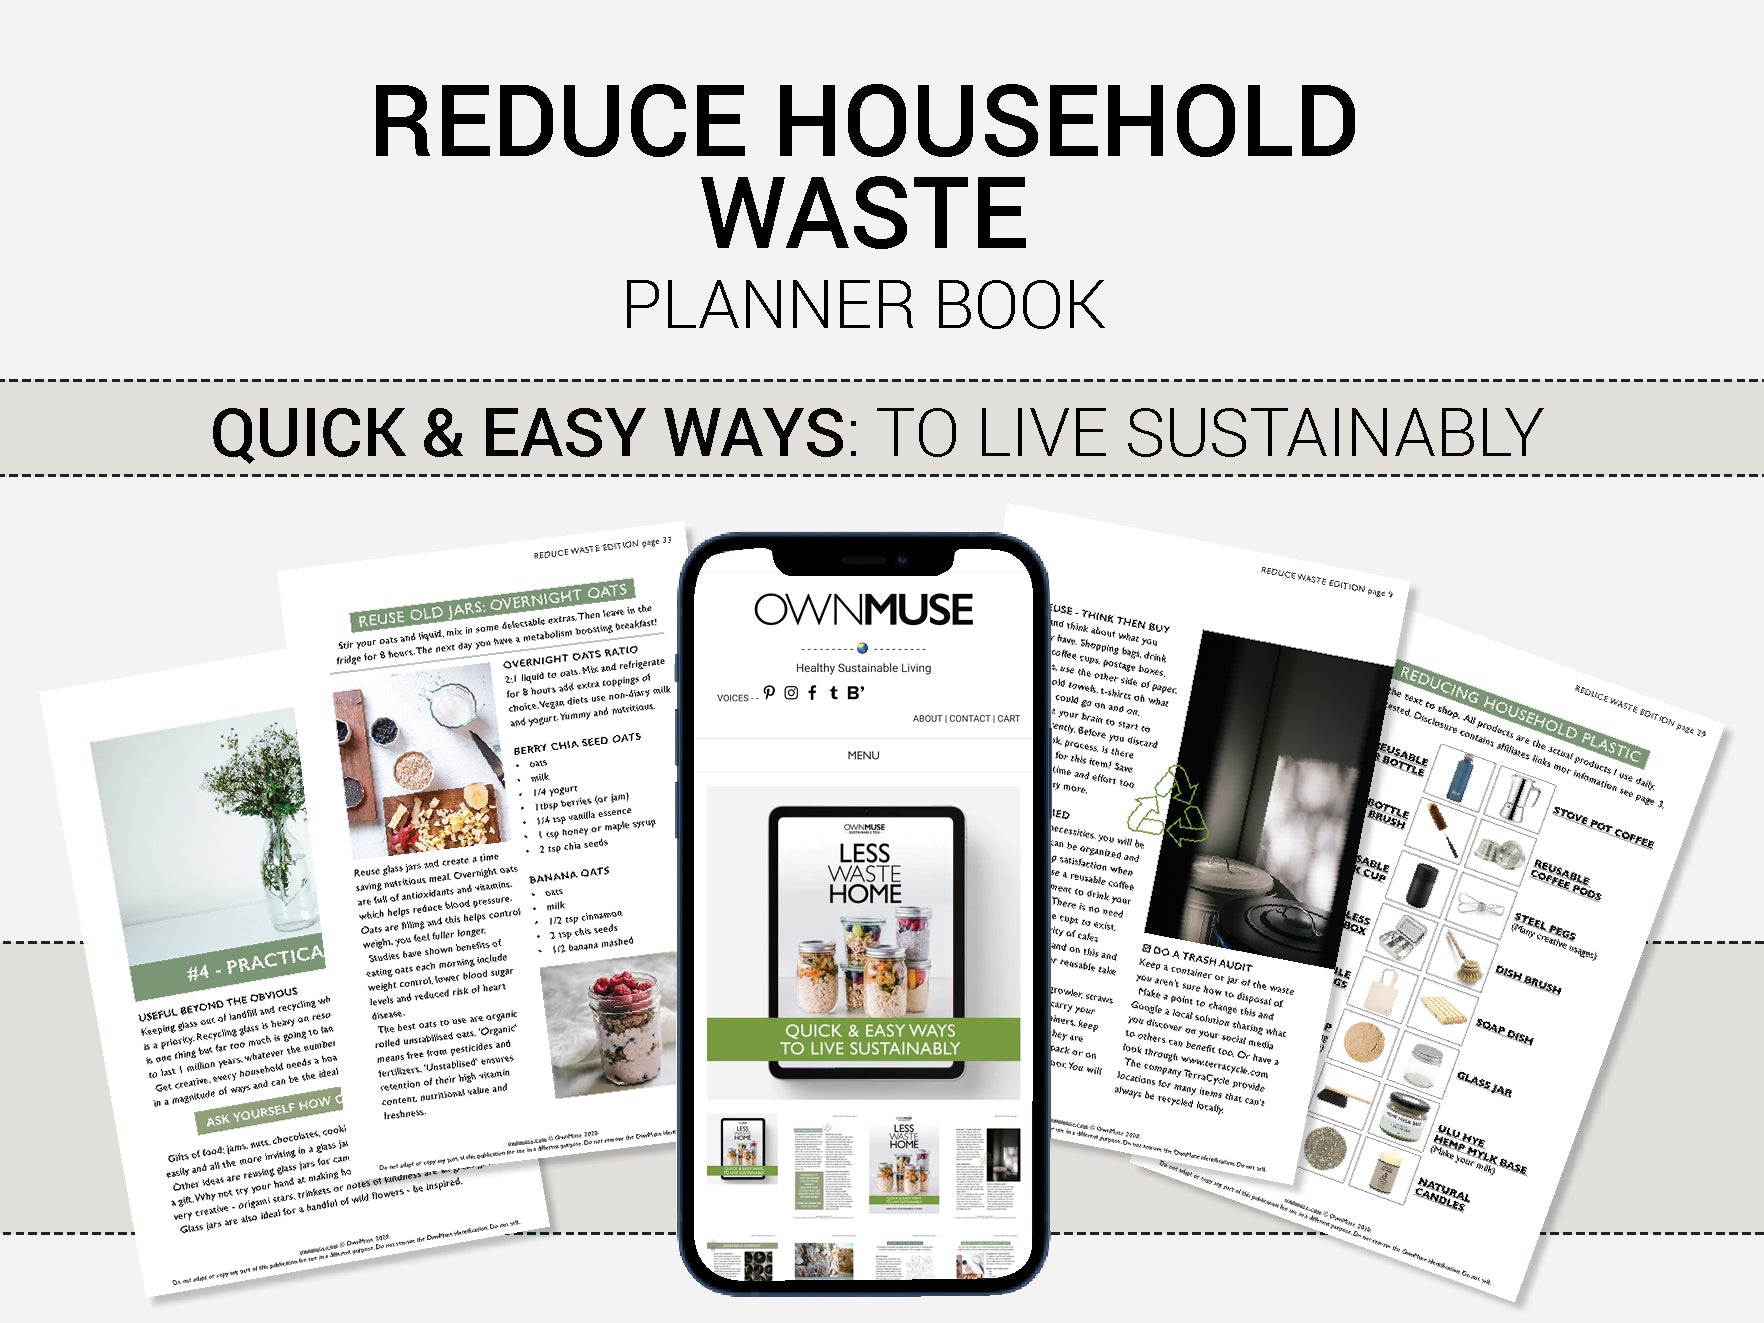 Less Waste Home Ebook; Step-by-step Sustainable Living